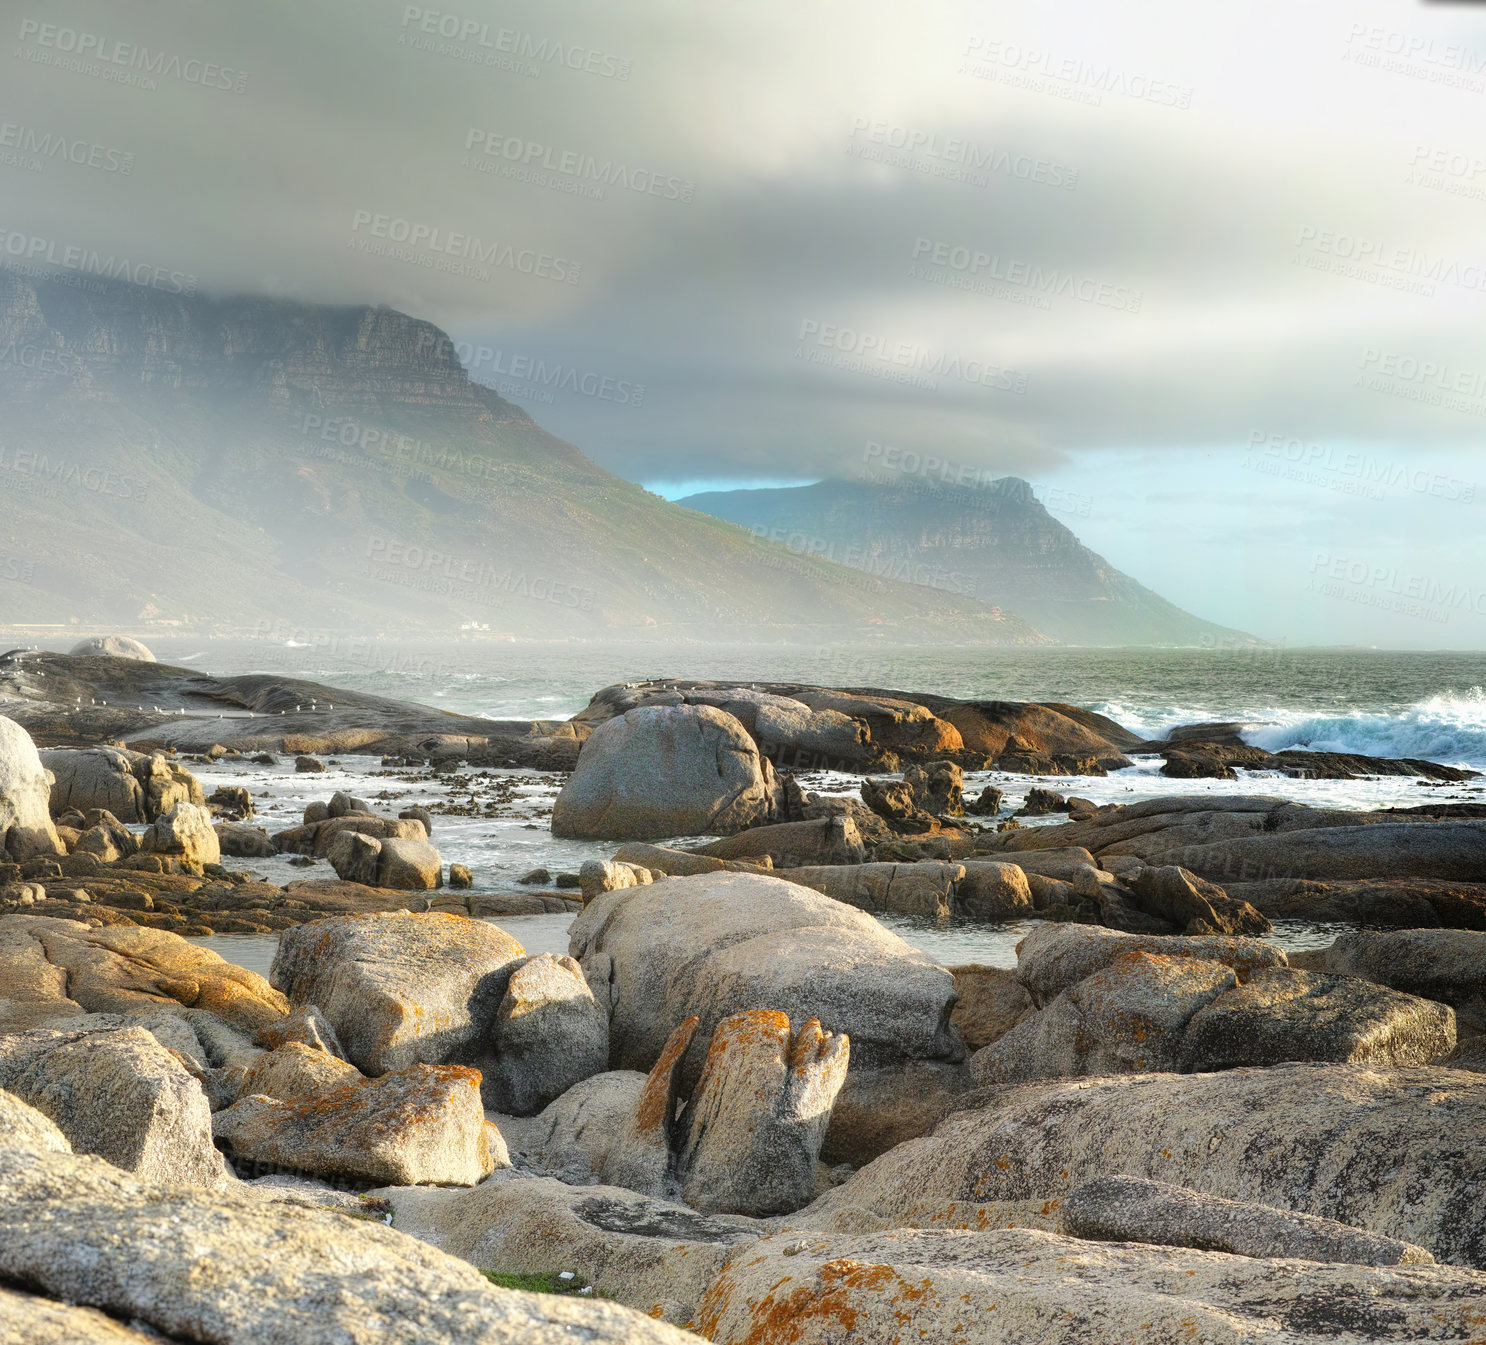 Buy stock photo Sea, rocks and landscape with beach and travel destination, waves and summer vacation in Cape Town. Environment, ocean view and seaside location with mountain and clouds, nature and adventure outdoor